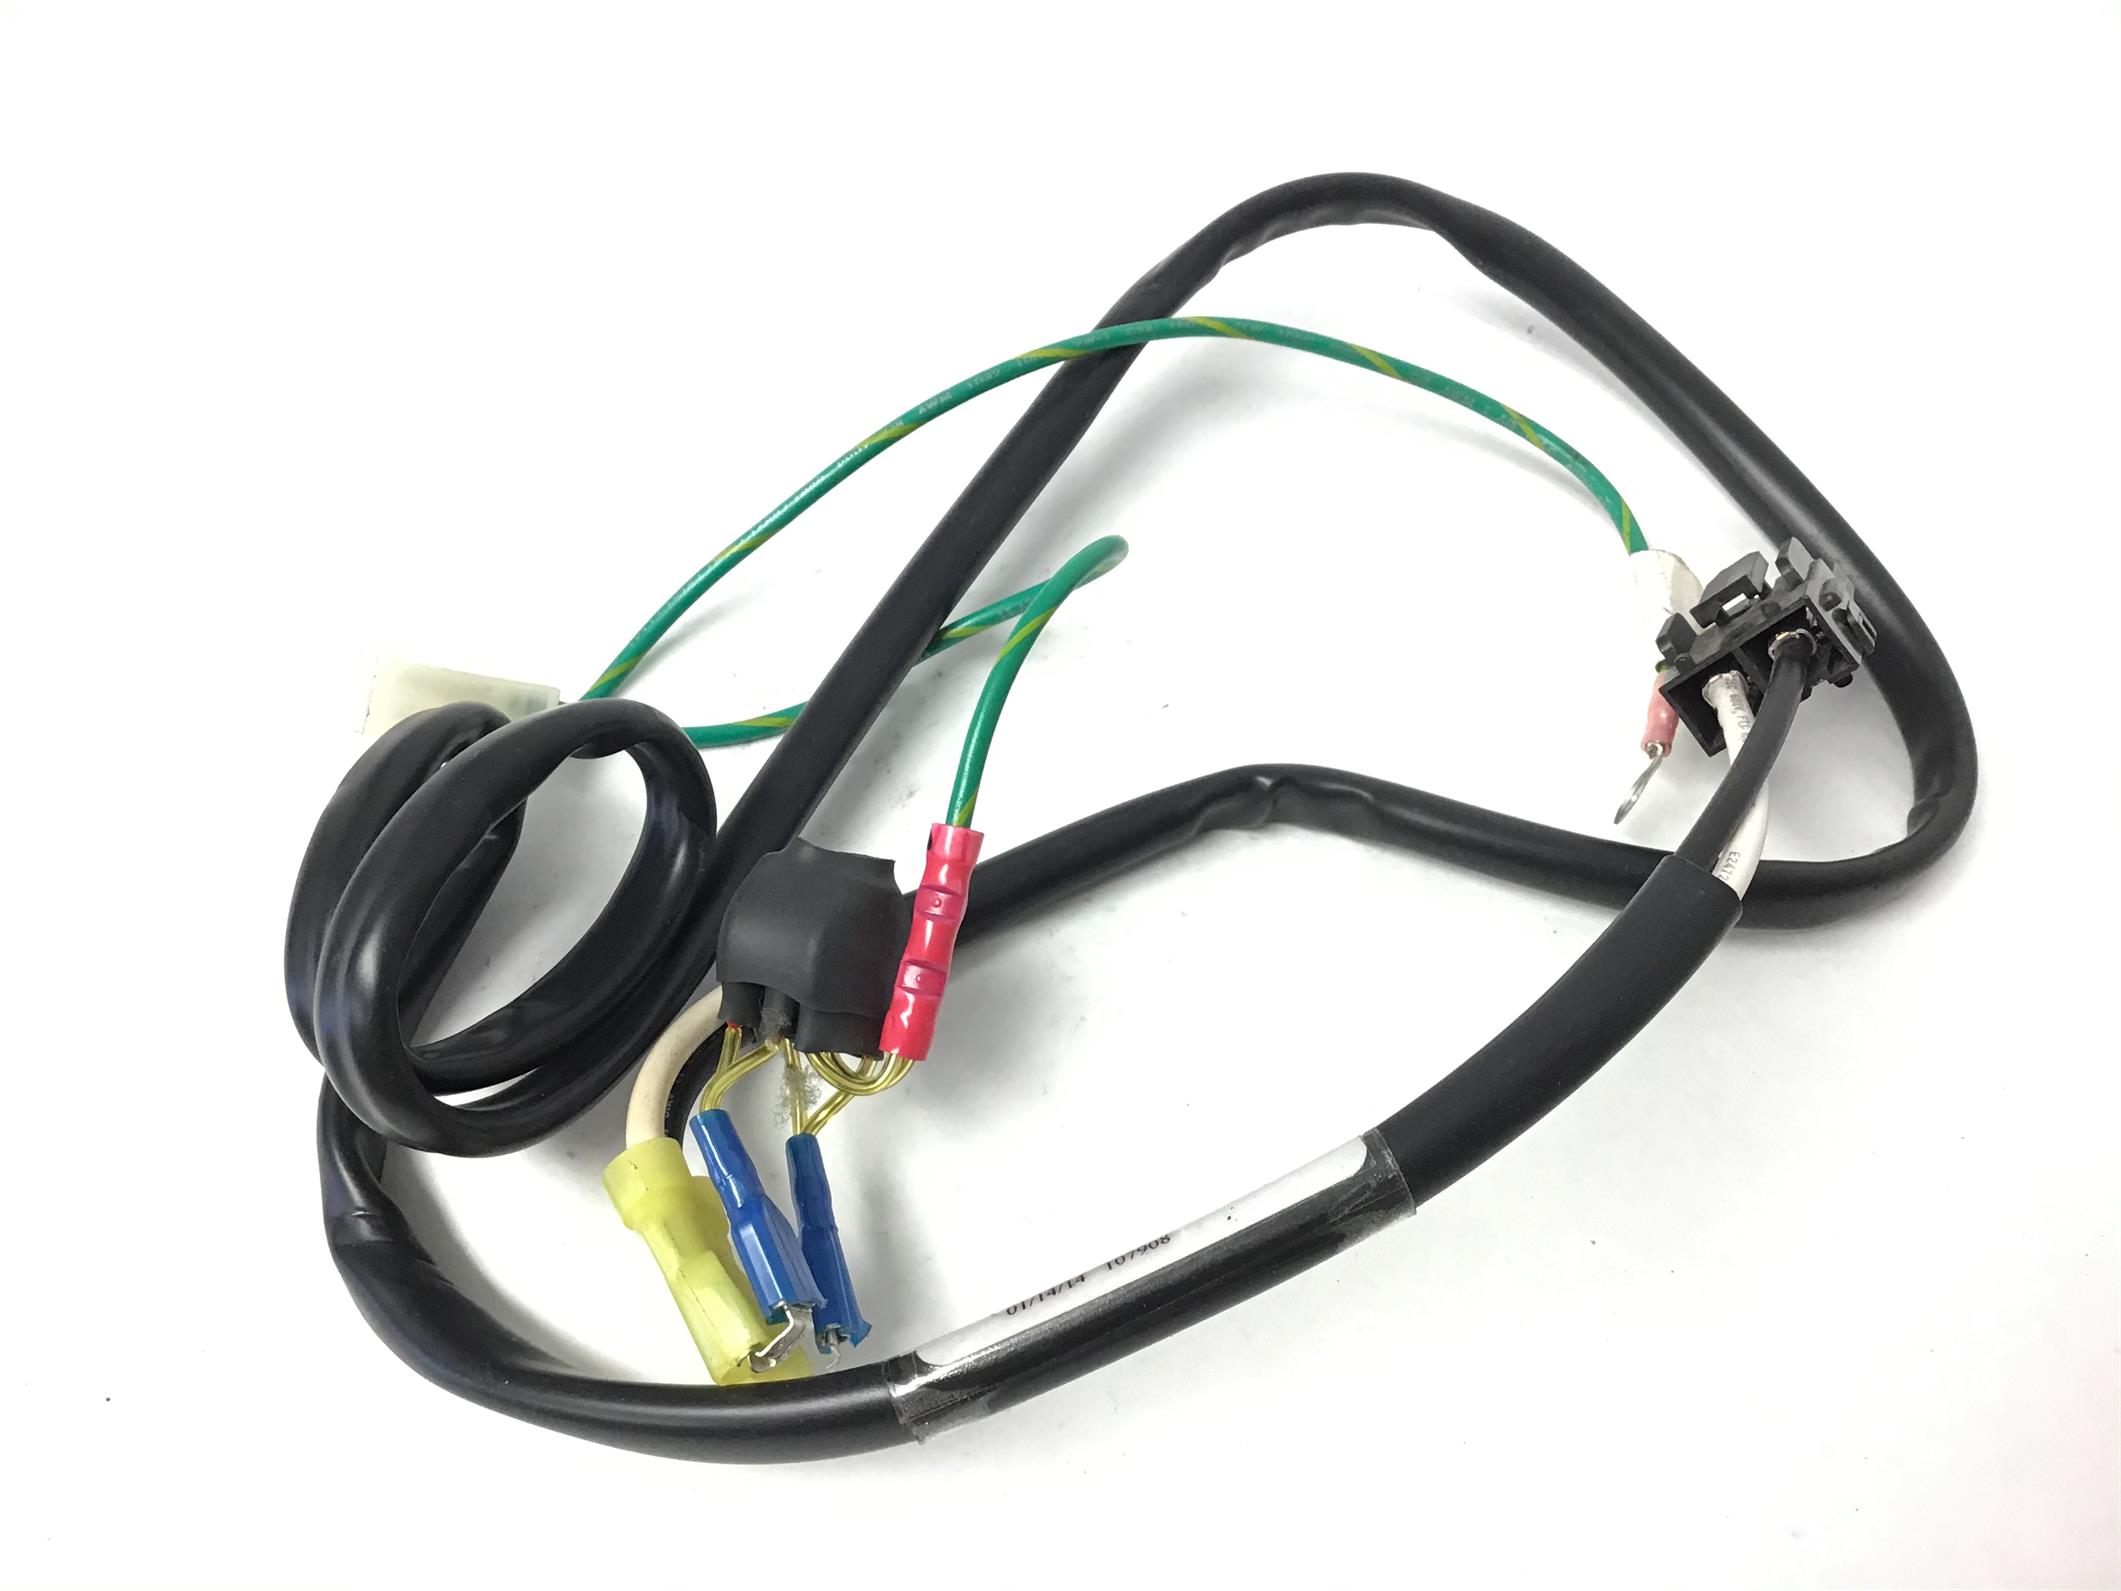 Power Cable: 230-240V - Internal